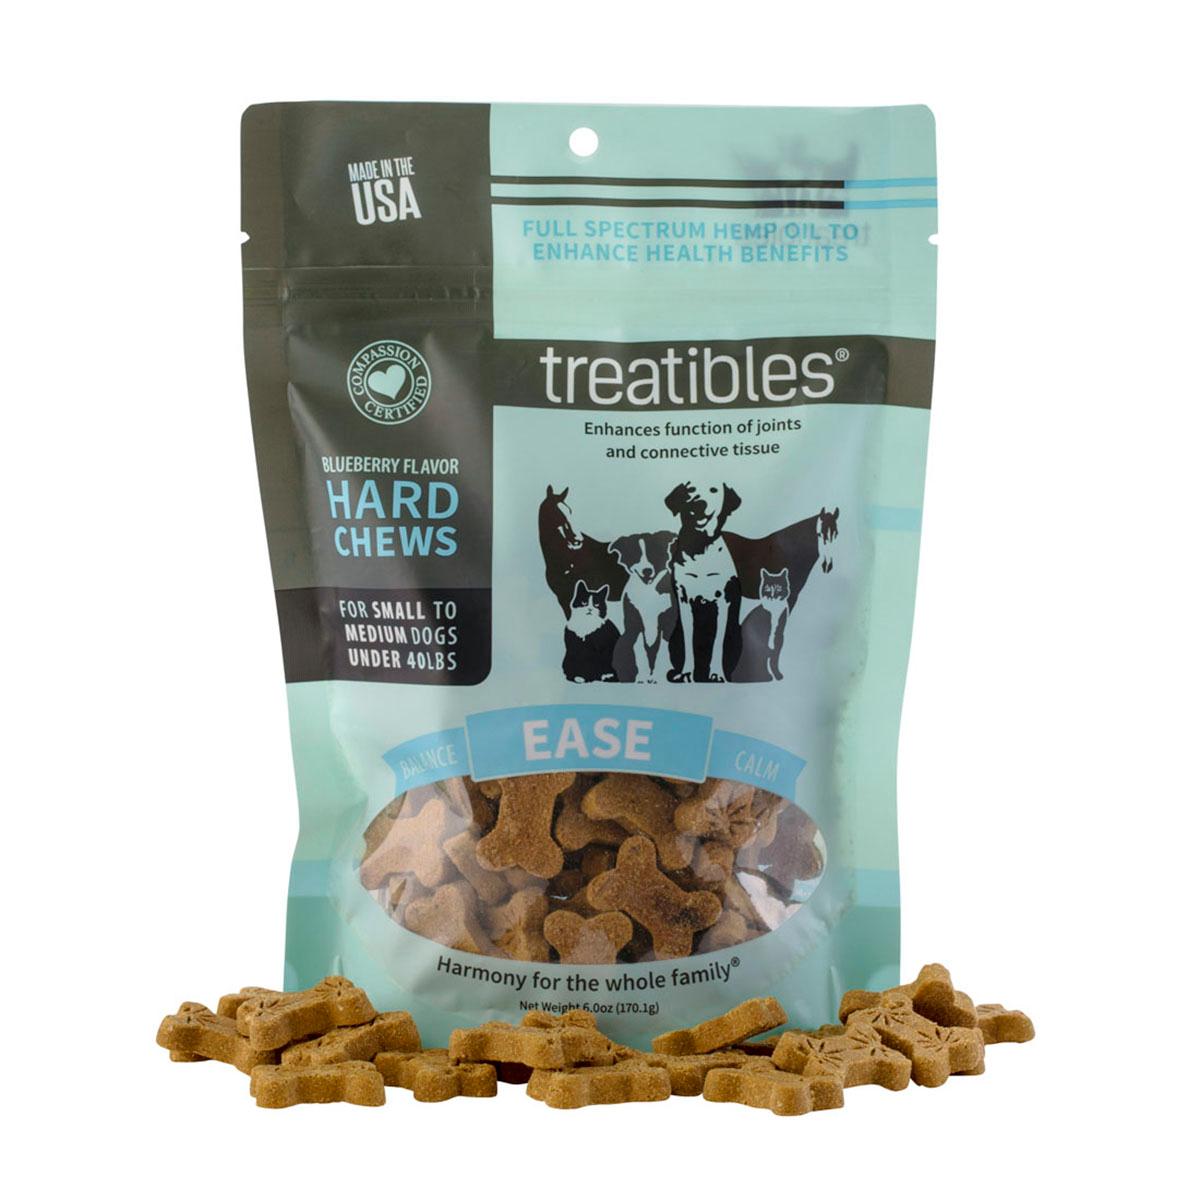 Treatibles CBD Ease Hard Chews for Dogs under 40 lbs - Blueberry